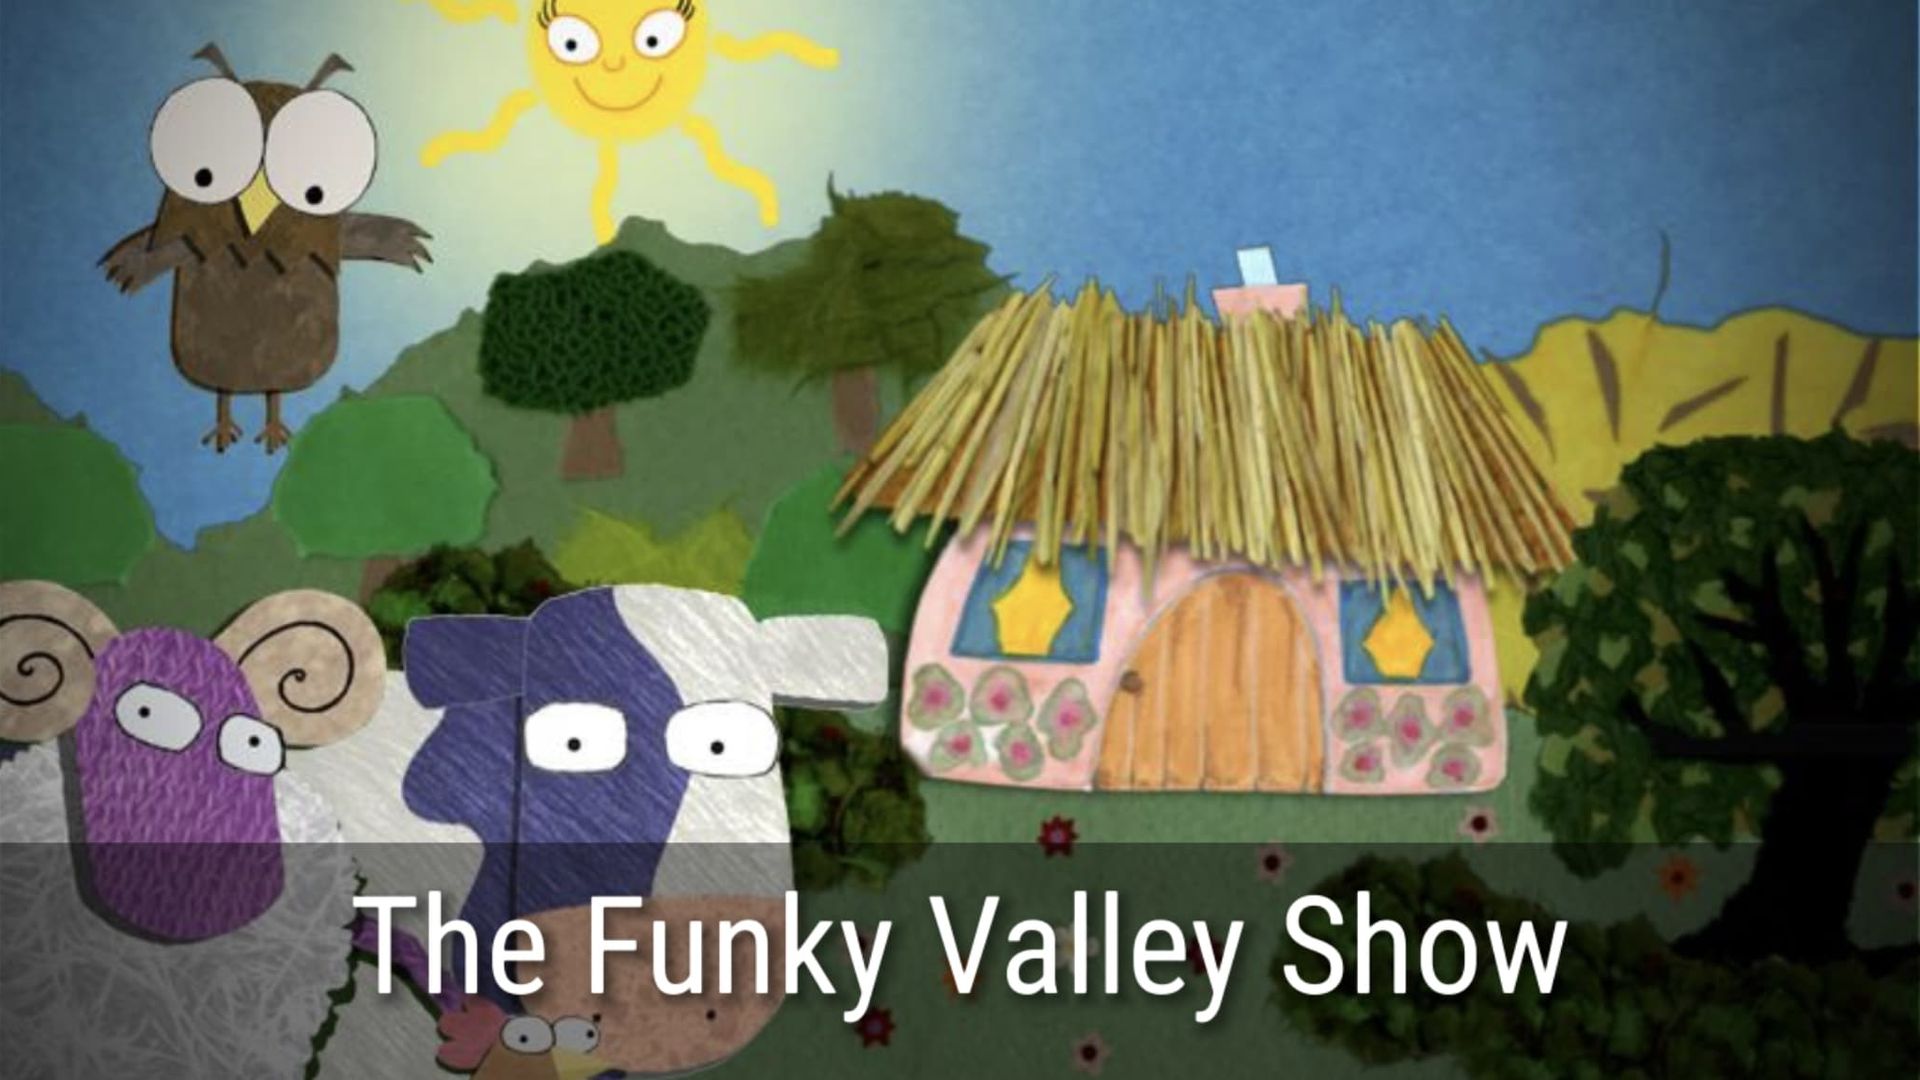 The Funky Valley Show background